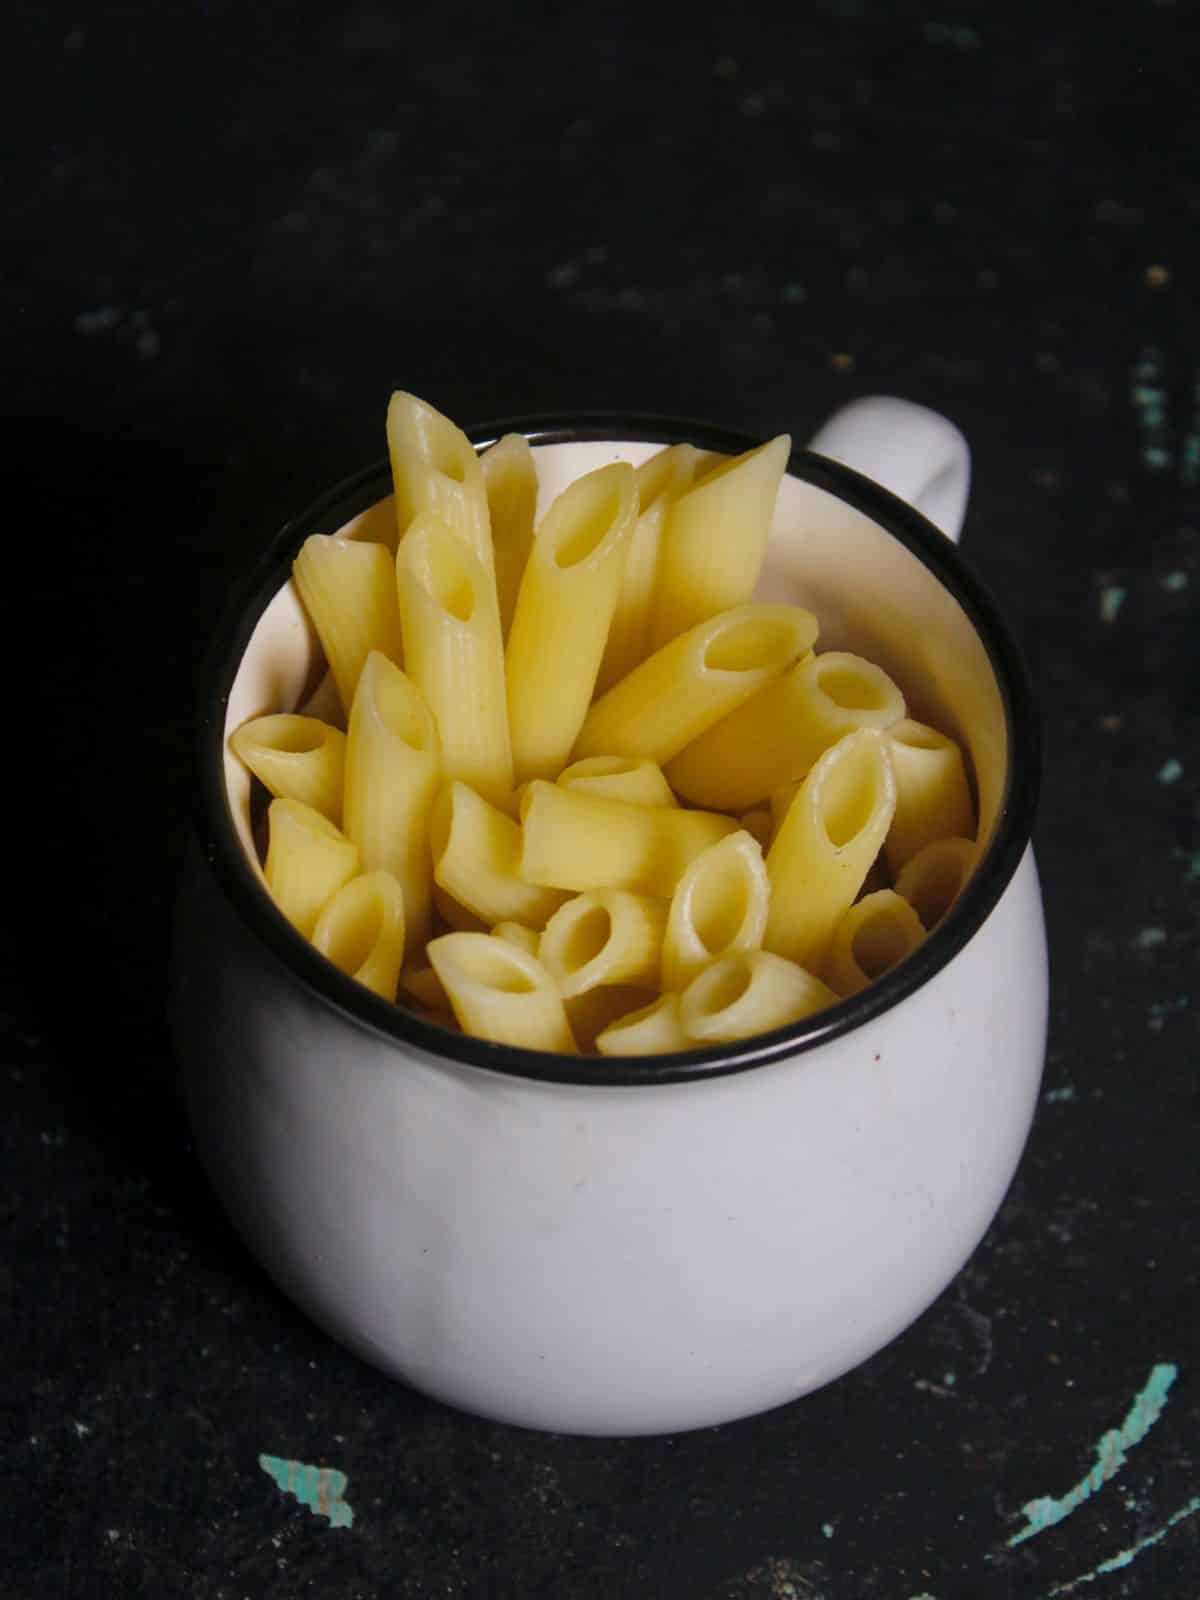 Add boiled pasta in the cup 